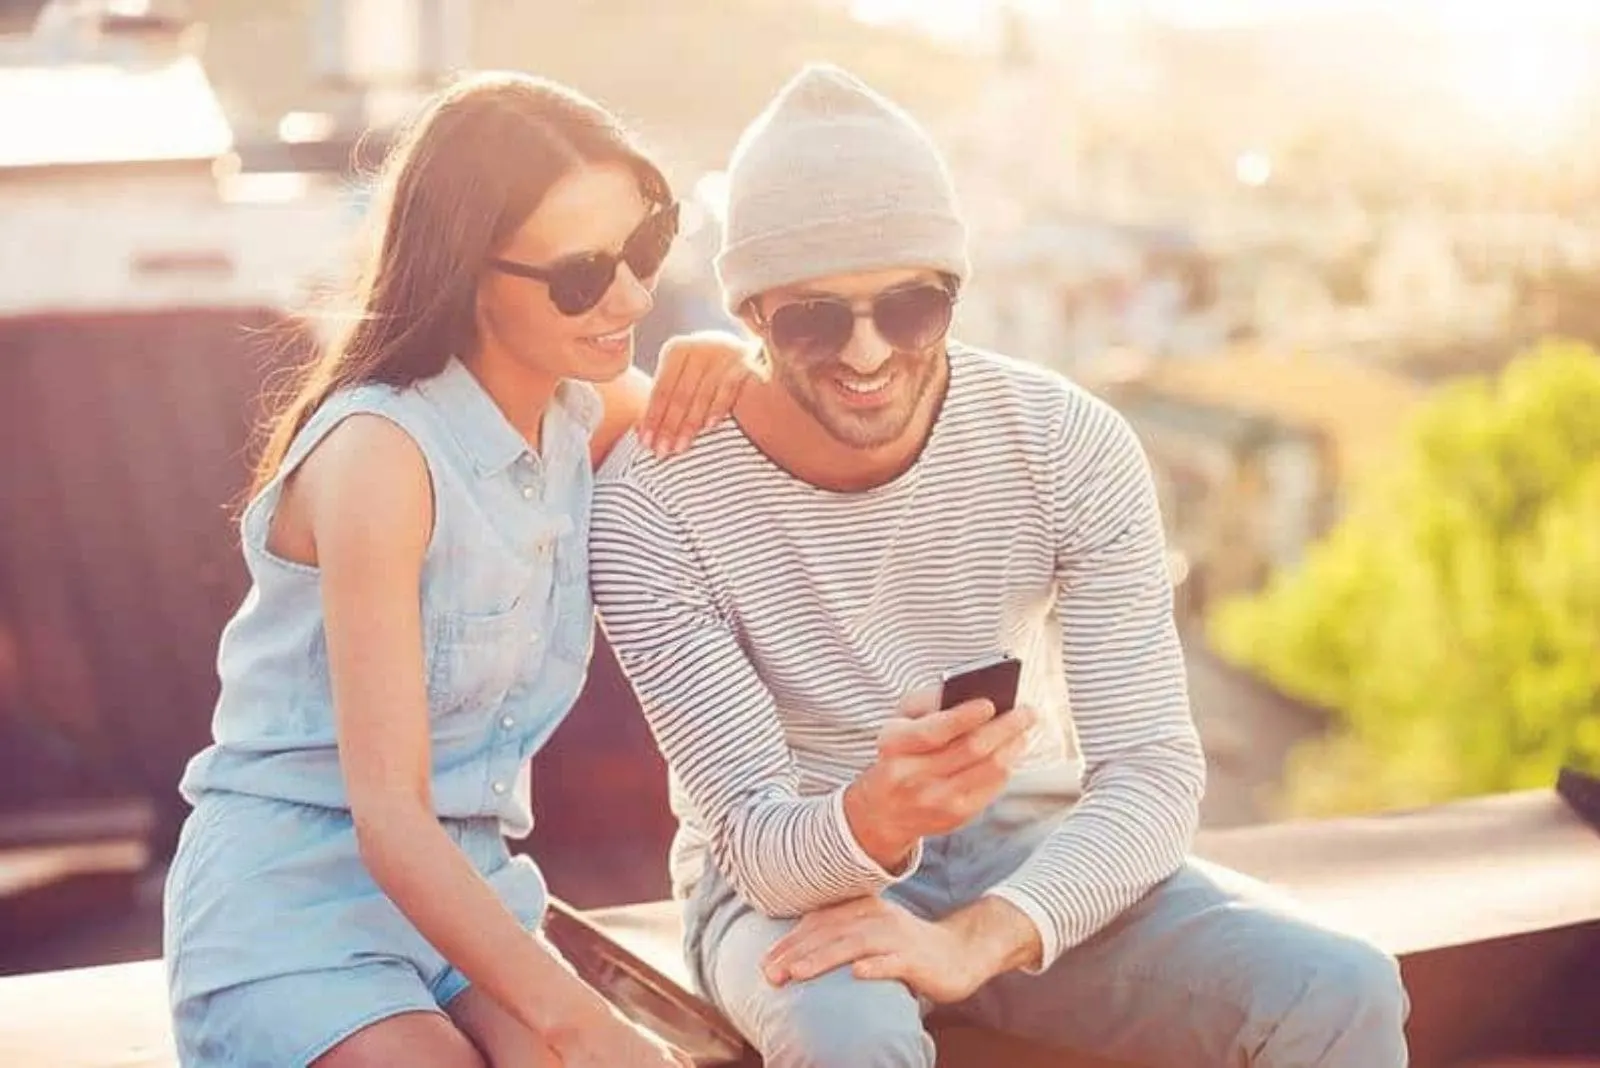 couple looking at smartphone and smiling